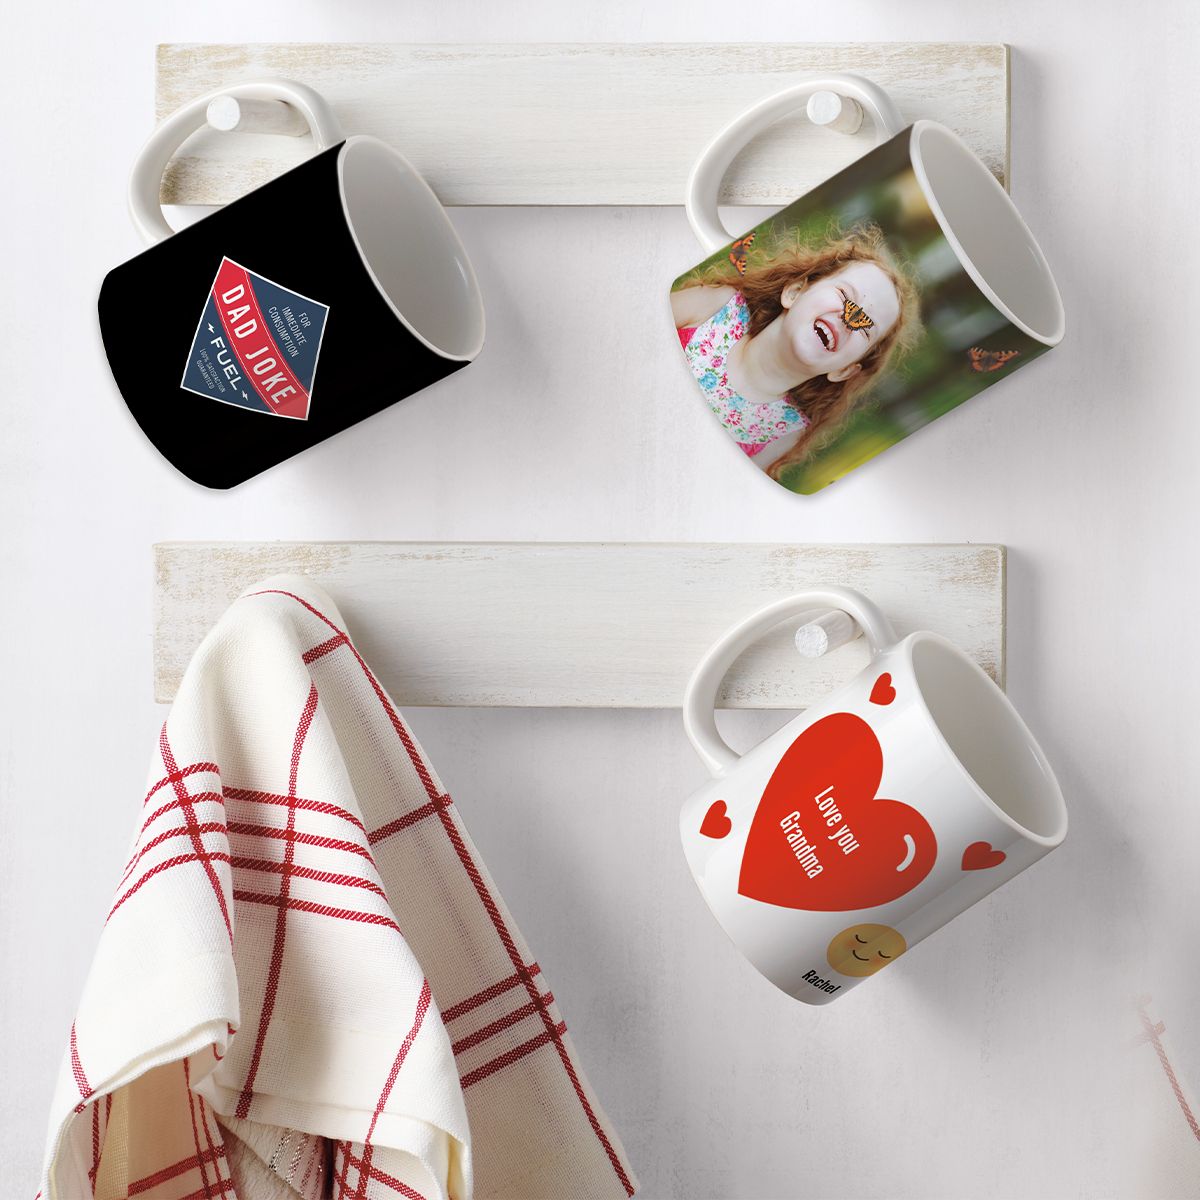 Personalise mugs to suit your decor. Add photos and text.